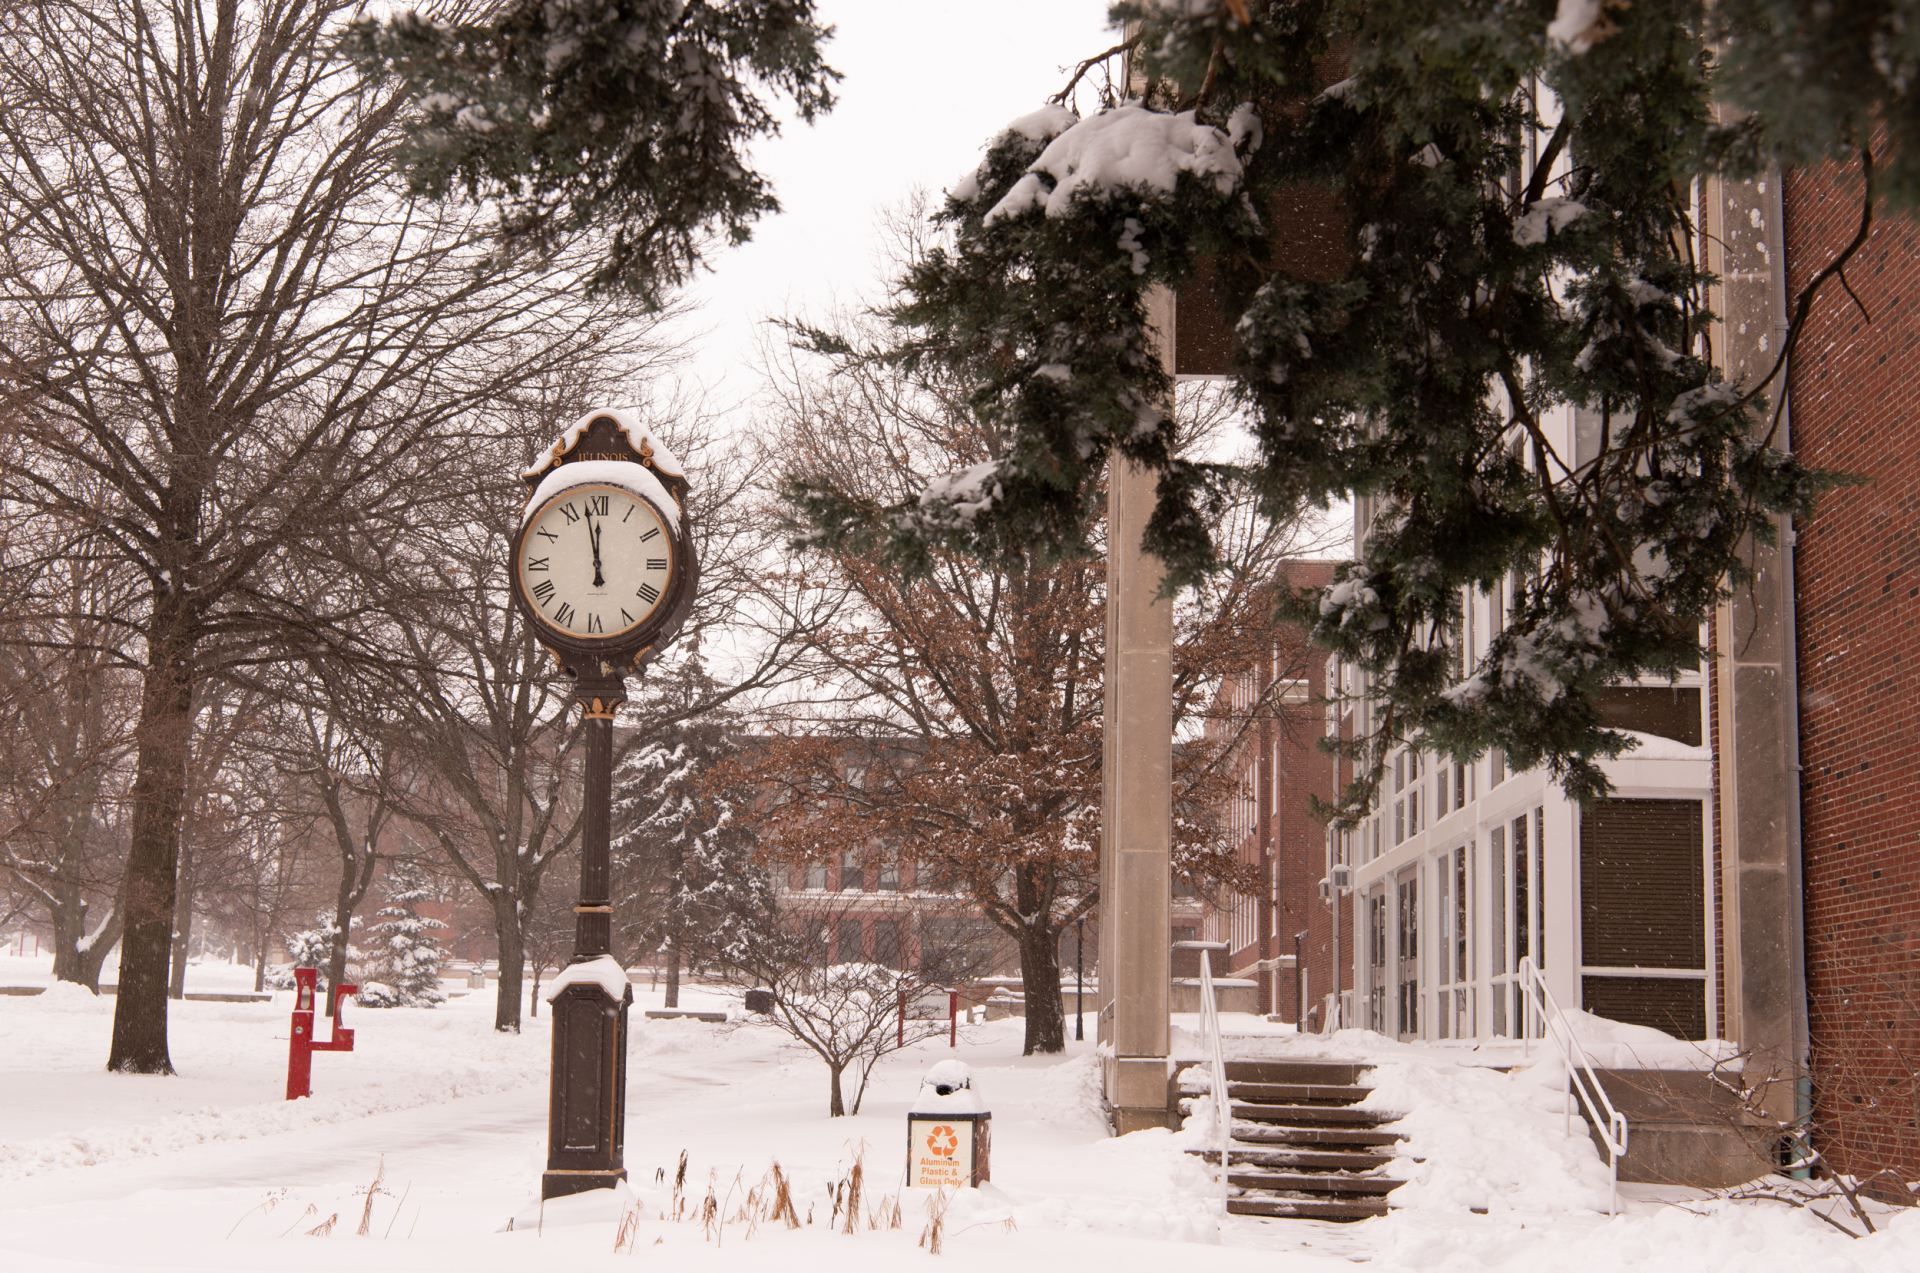 The clock on The Illinois State Quad.